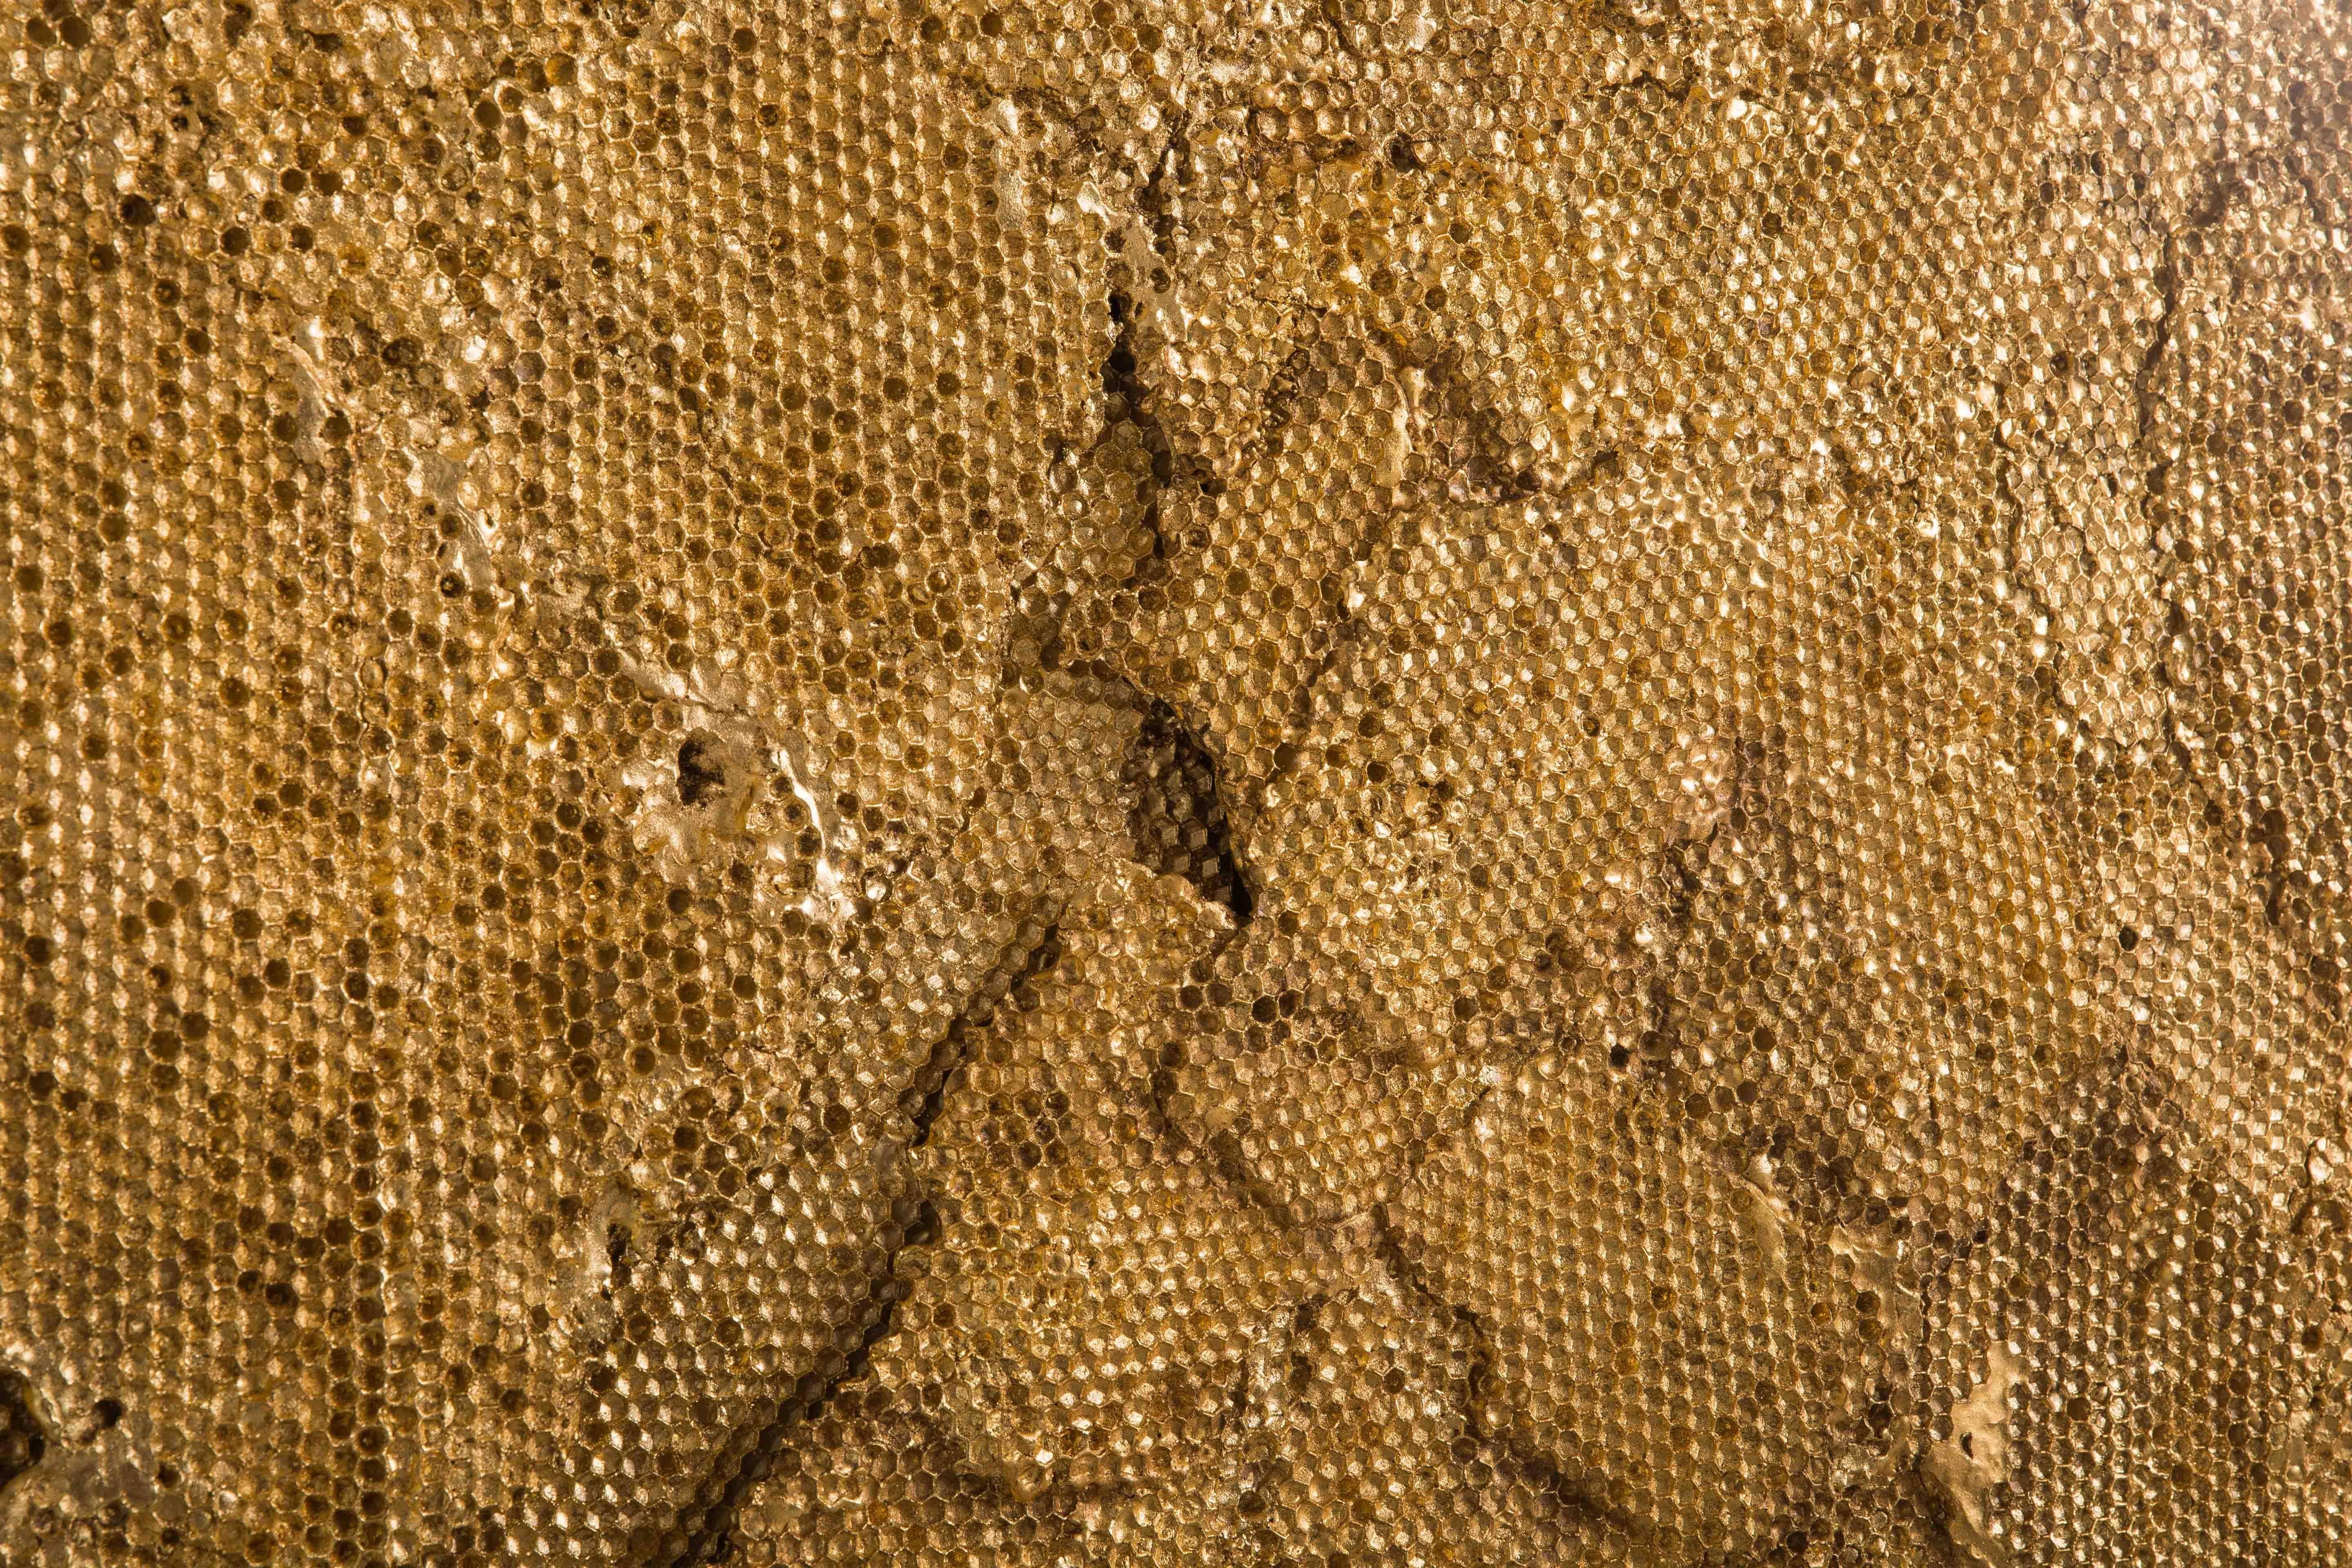 Tapestry, 2016, a large-scale wall hanging is constructed of deeply faceted overhanging layers of plaster honeycomb, gilded and highly patinated. The substantial overlapping layers of the work gently hang giving the work the feeling of fragments of